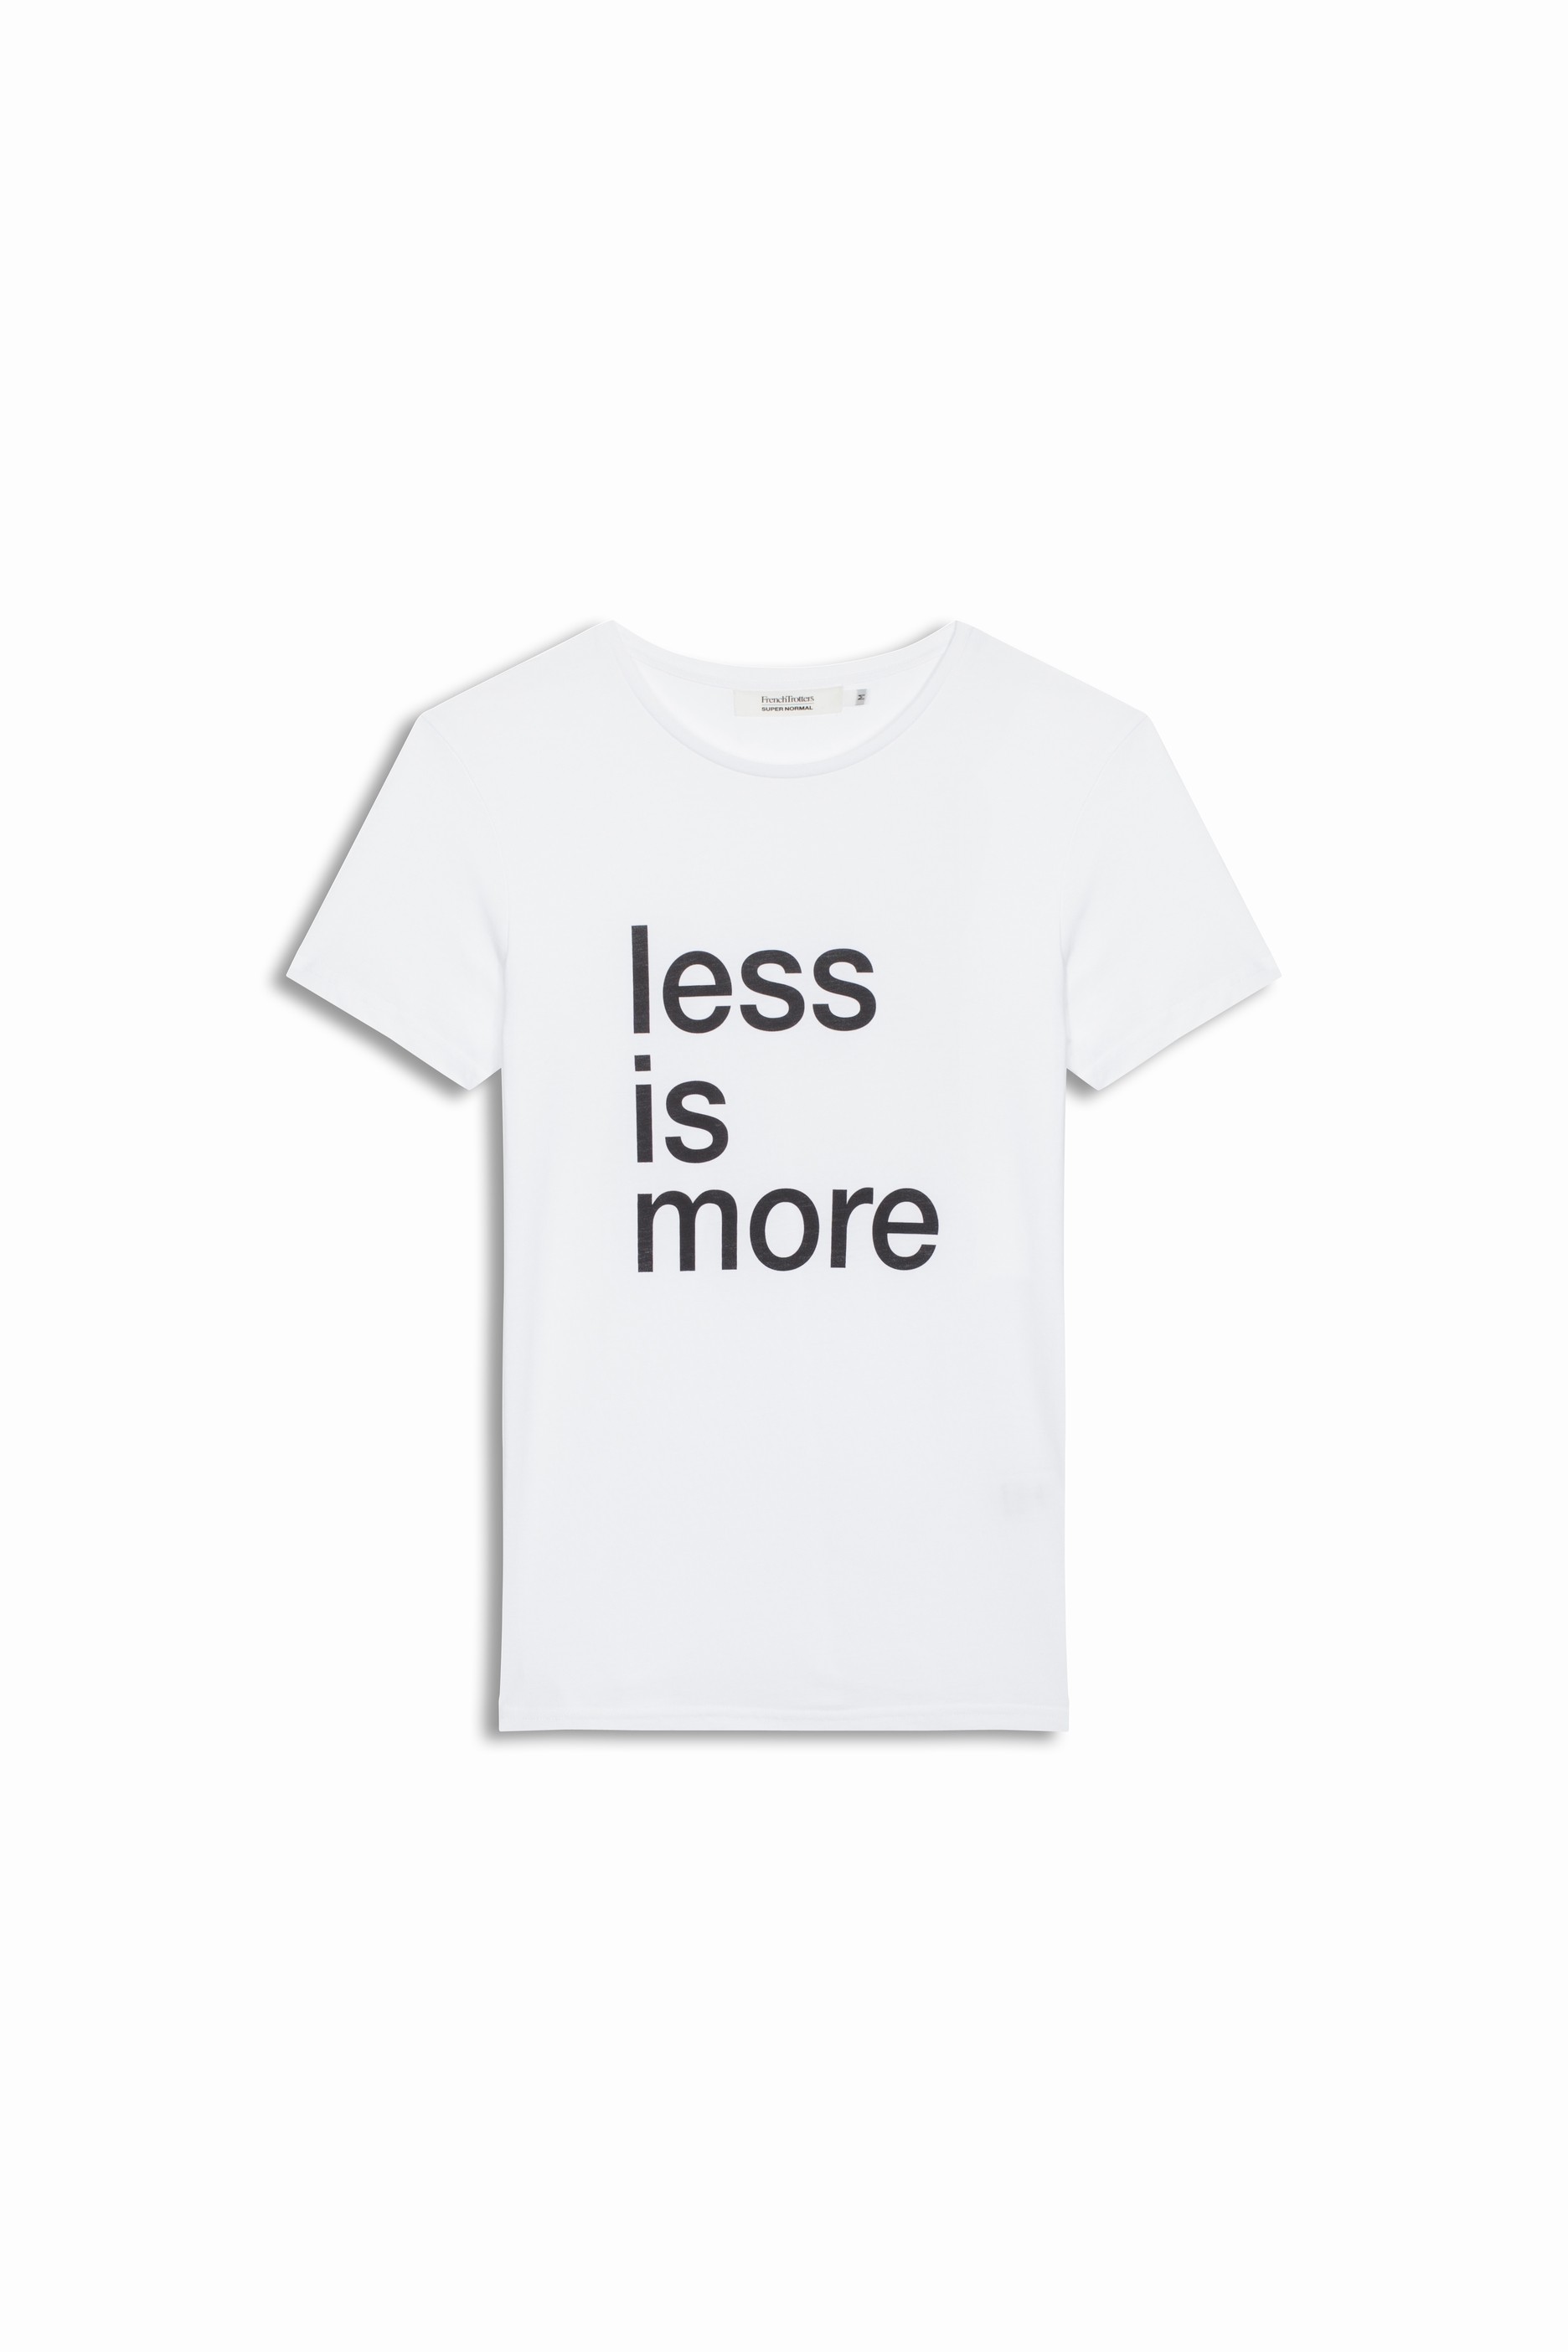 MARK LESS IS MORE - WHITE